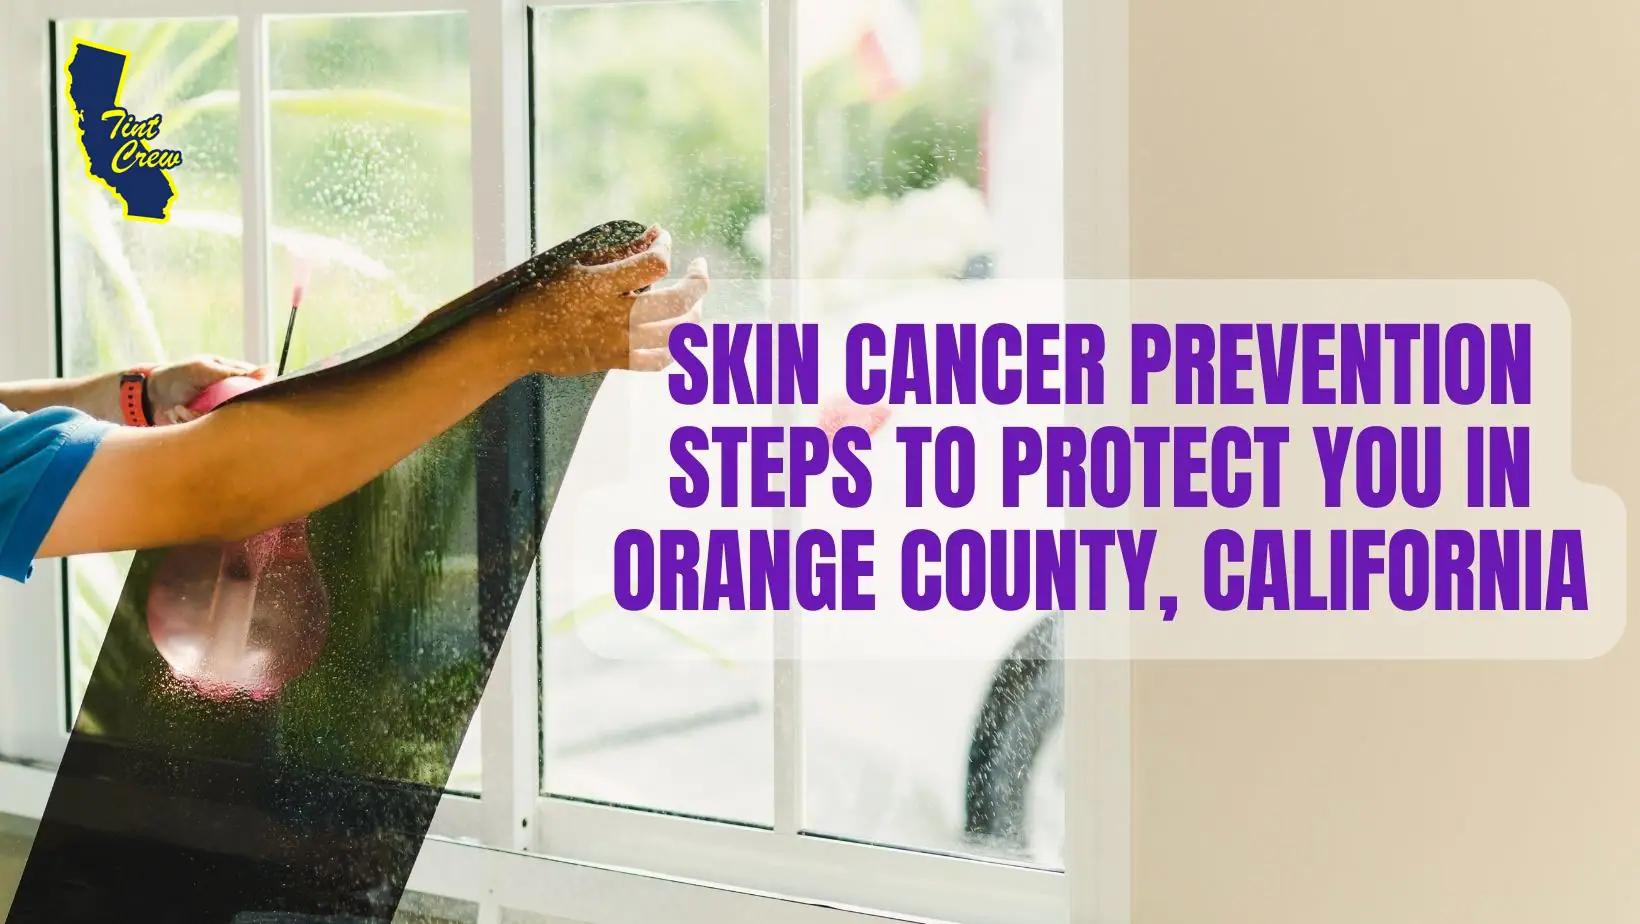 Skin Cancer Prevention Steps to Protect You in Orange County, California